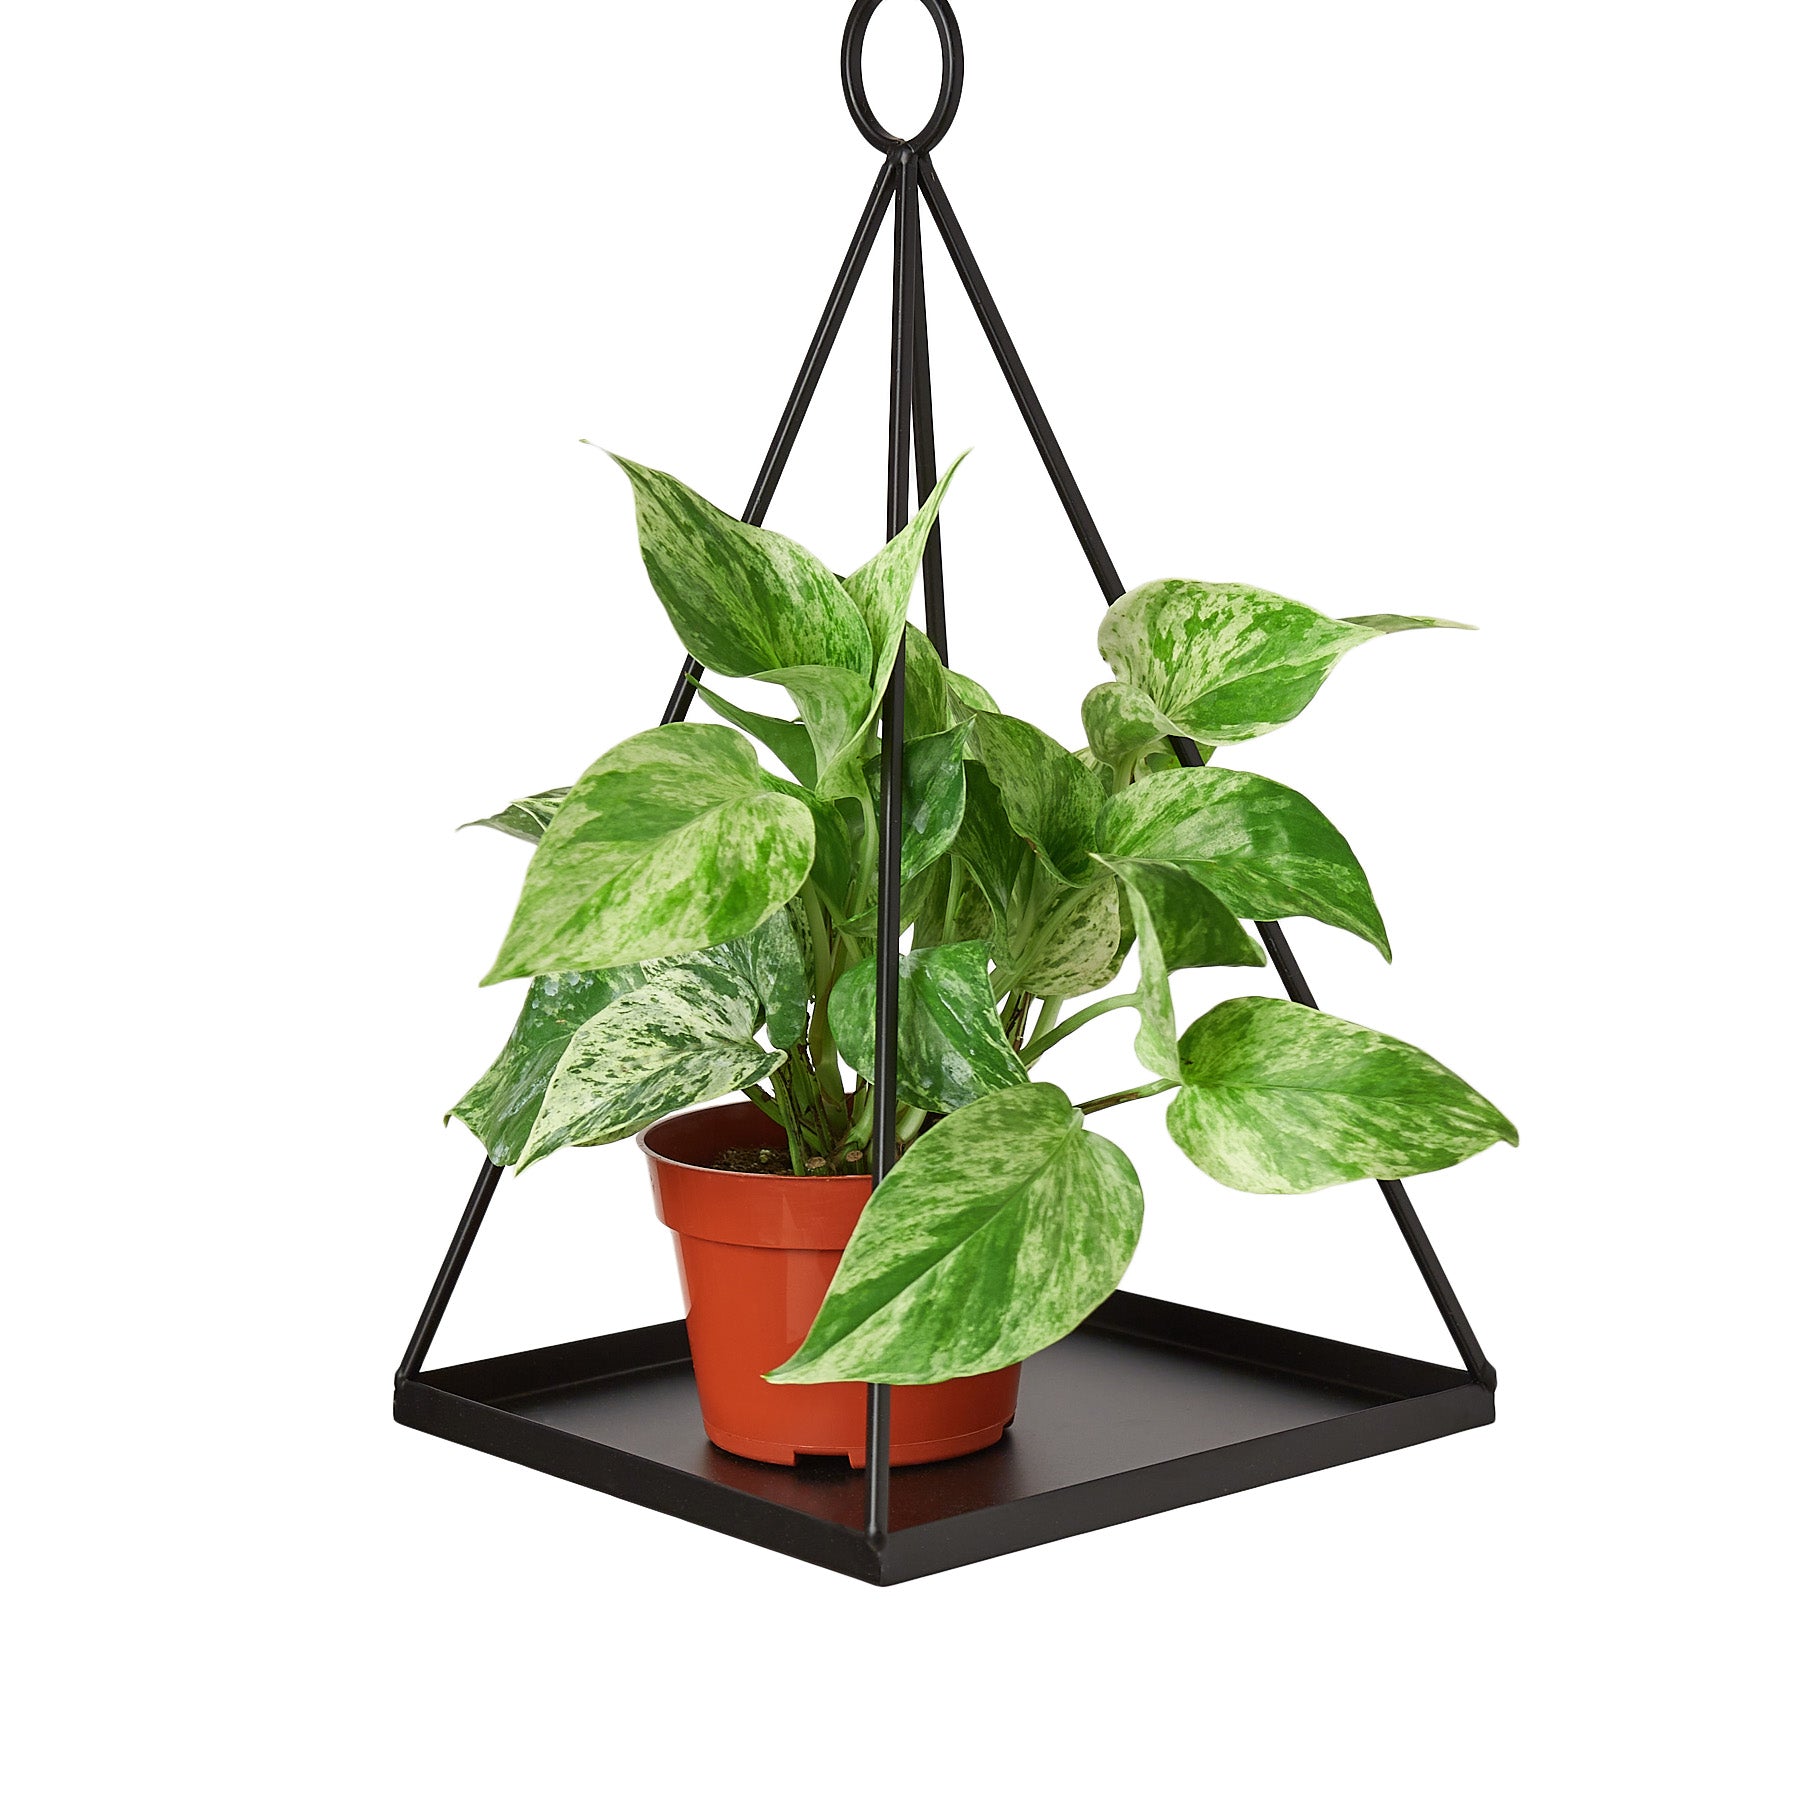 A stylish black triangle plant stand showcasing a beautifully potted plant.